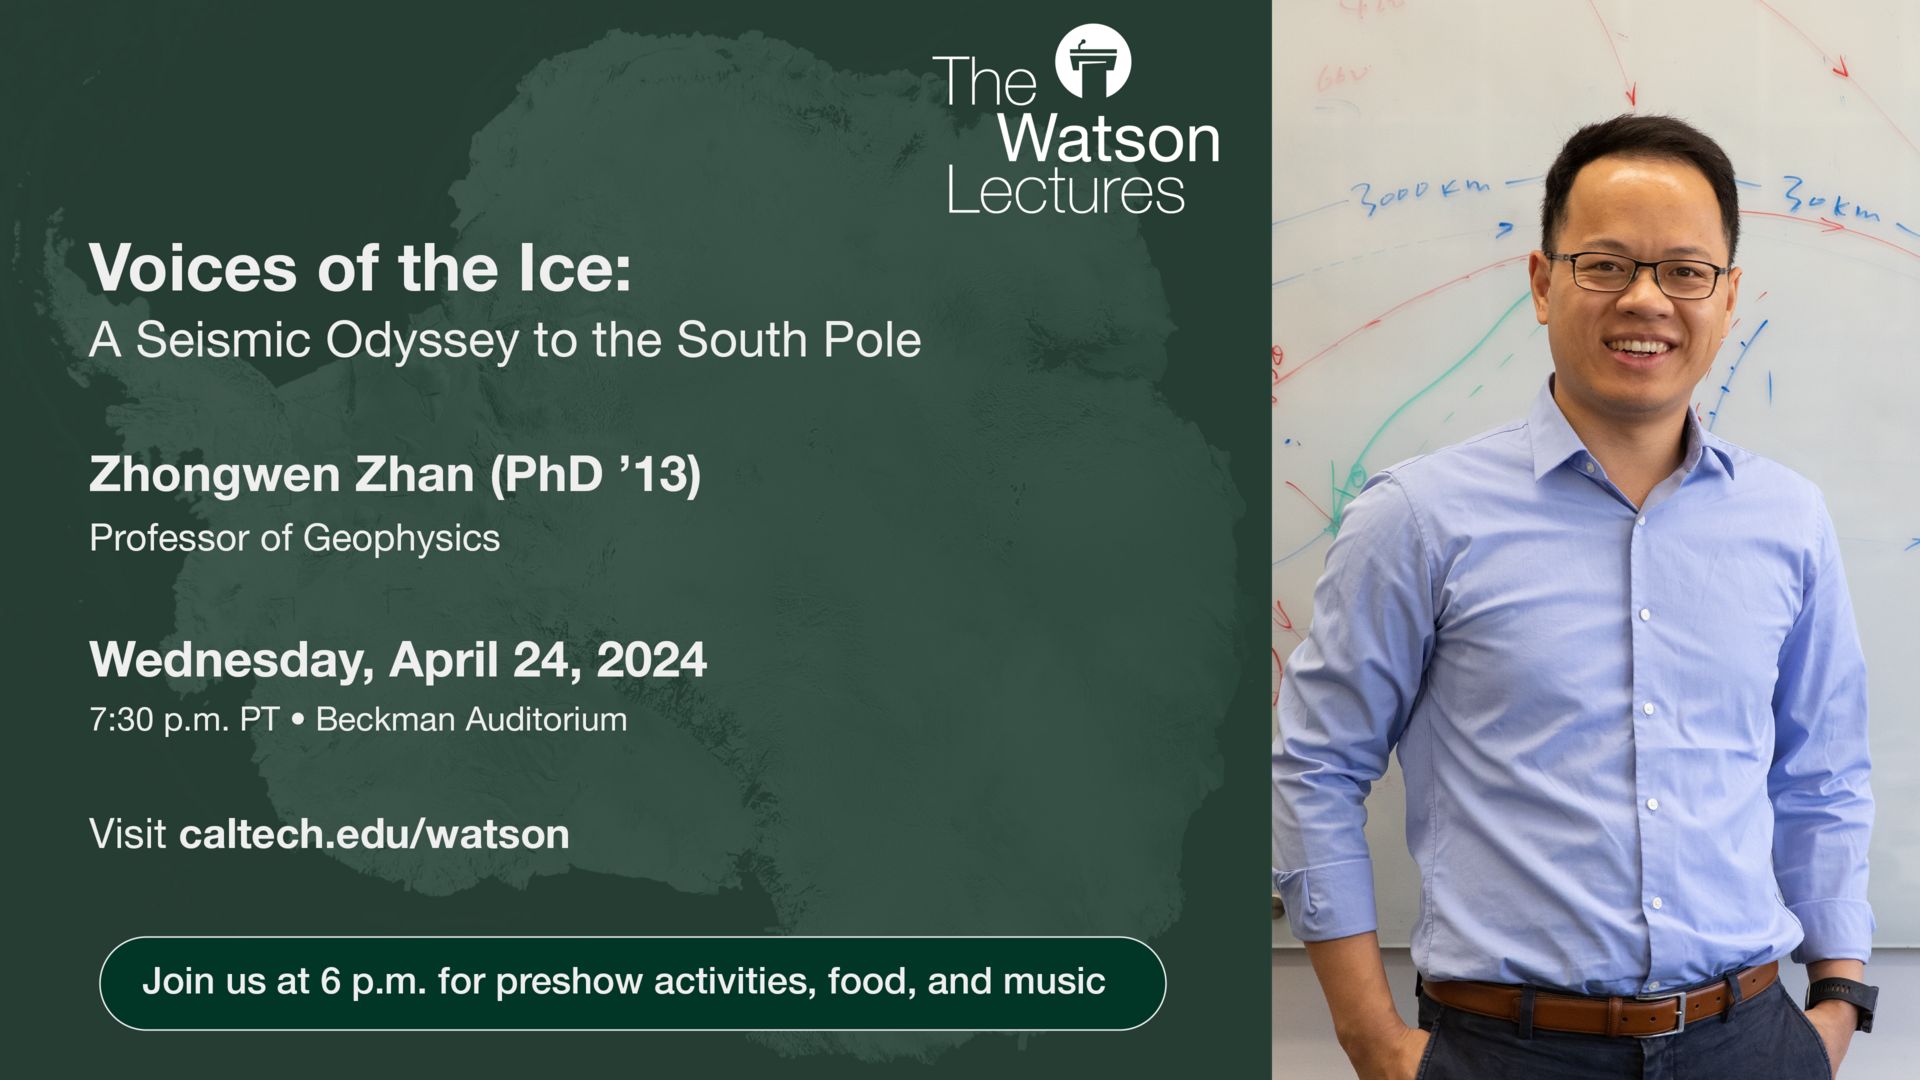 Watson Lecture - Voices of the Ice: A Seismic Odyssey to the South Pole, Pasadena, California, United States